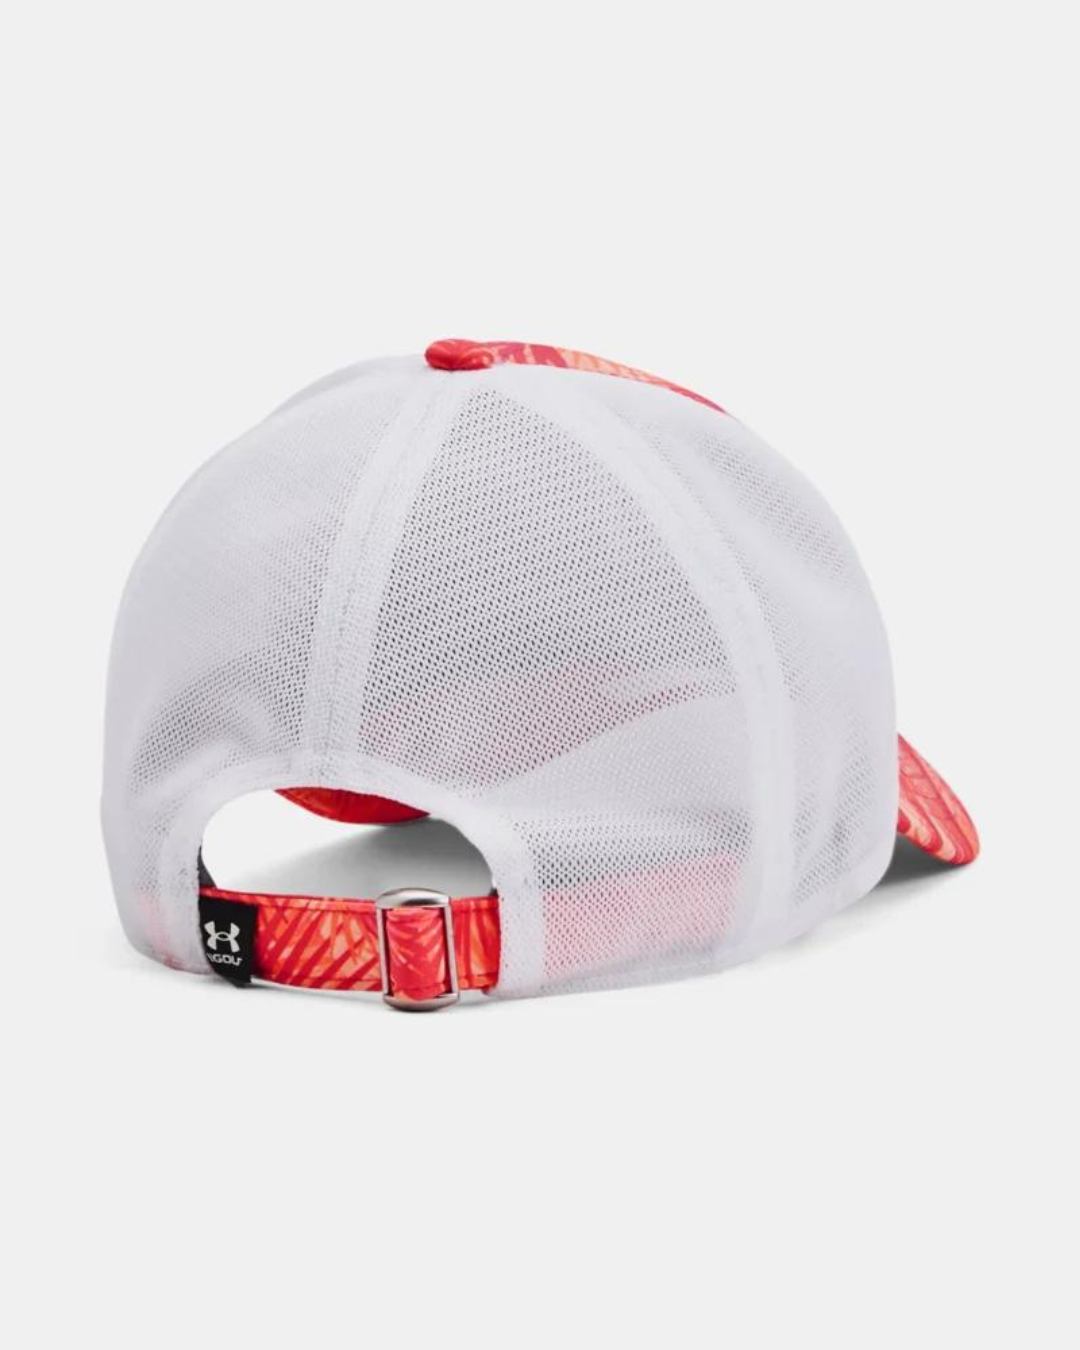 Under Armor Iso-Chill Driver Adjustable Cap - Pink/White